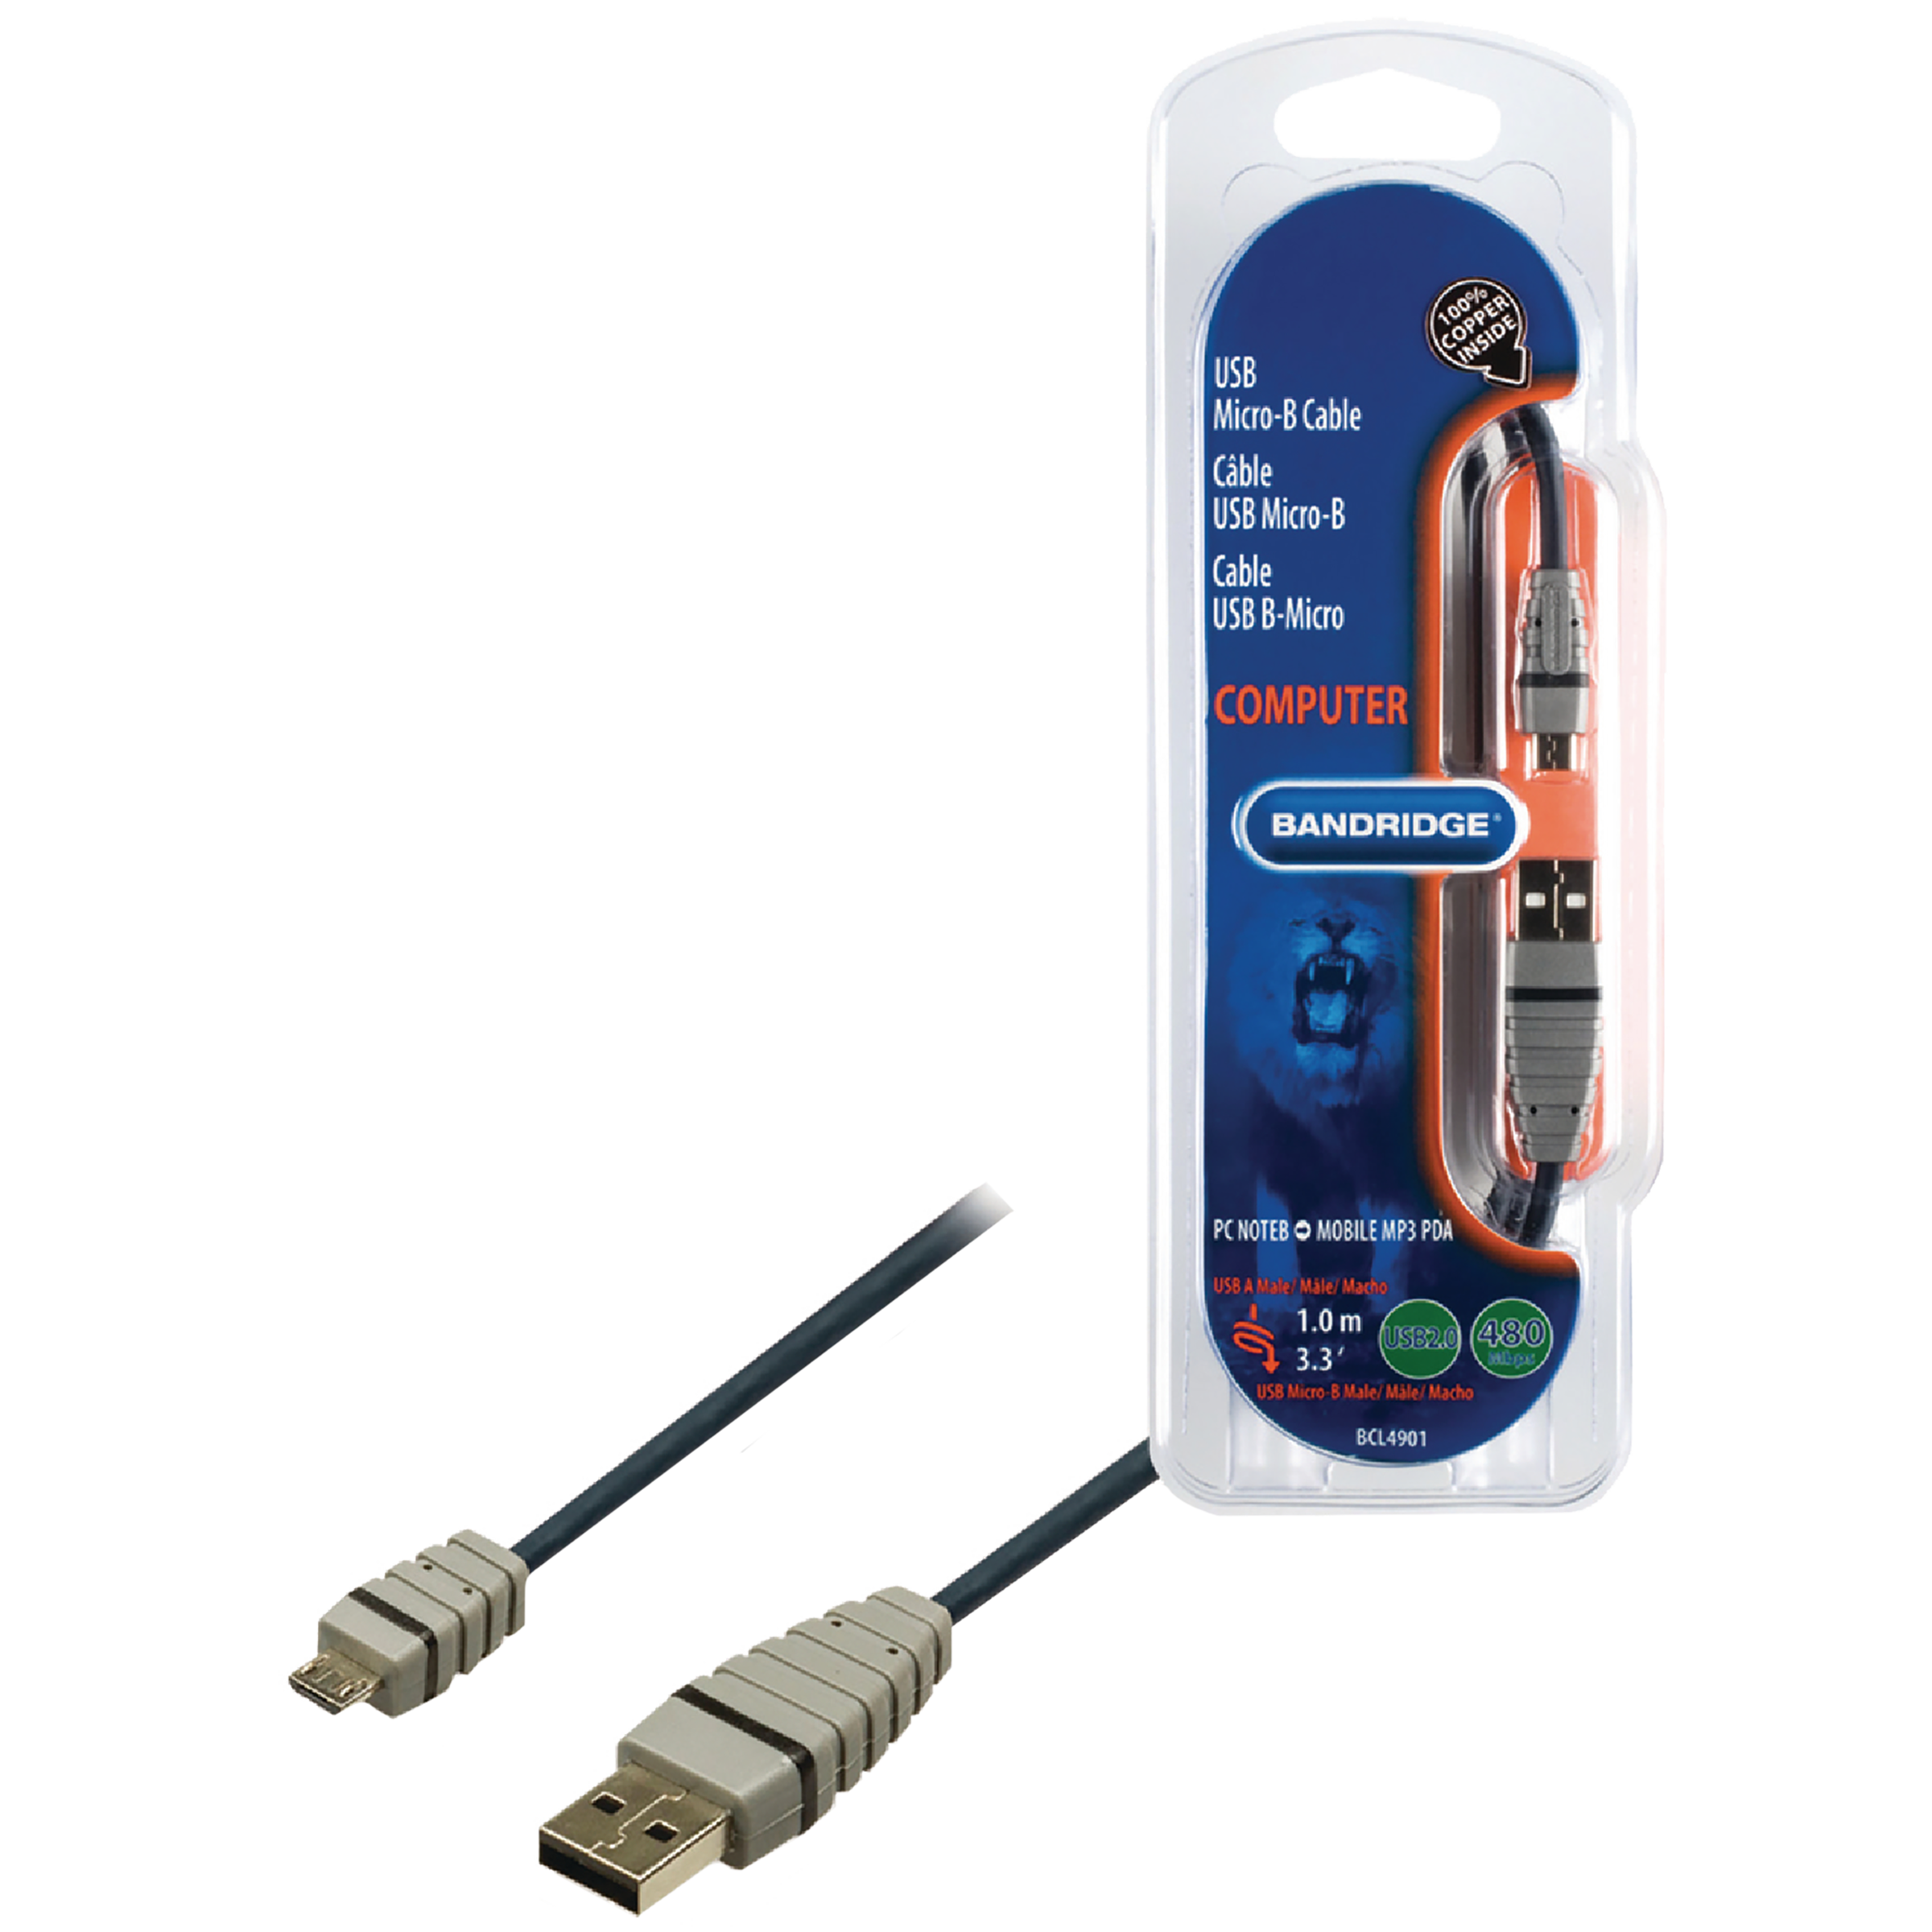 Bandridge BCL4901 PVC 1 Meter USB 2.0 (Type-A) to Micro USB 2.0 (Type-B) Power/Charging USB Cable (100% Copper Inside, Blue)